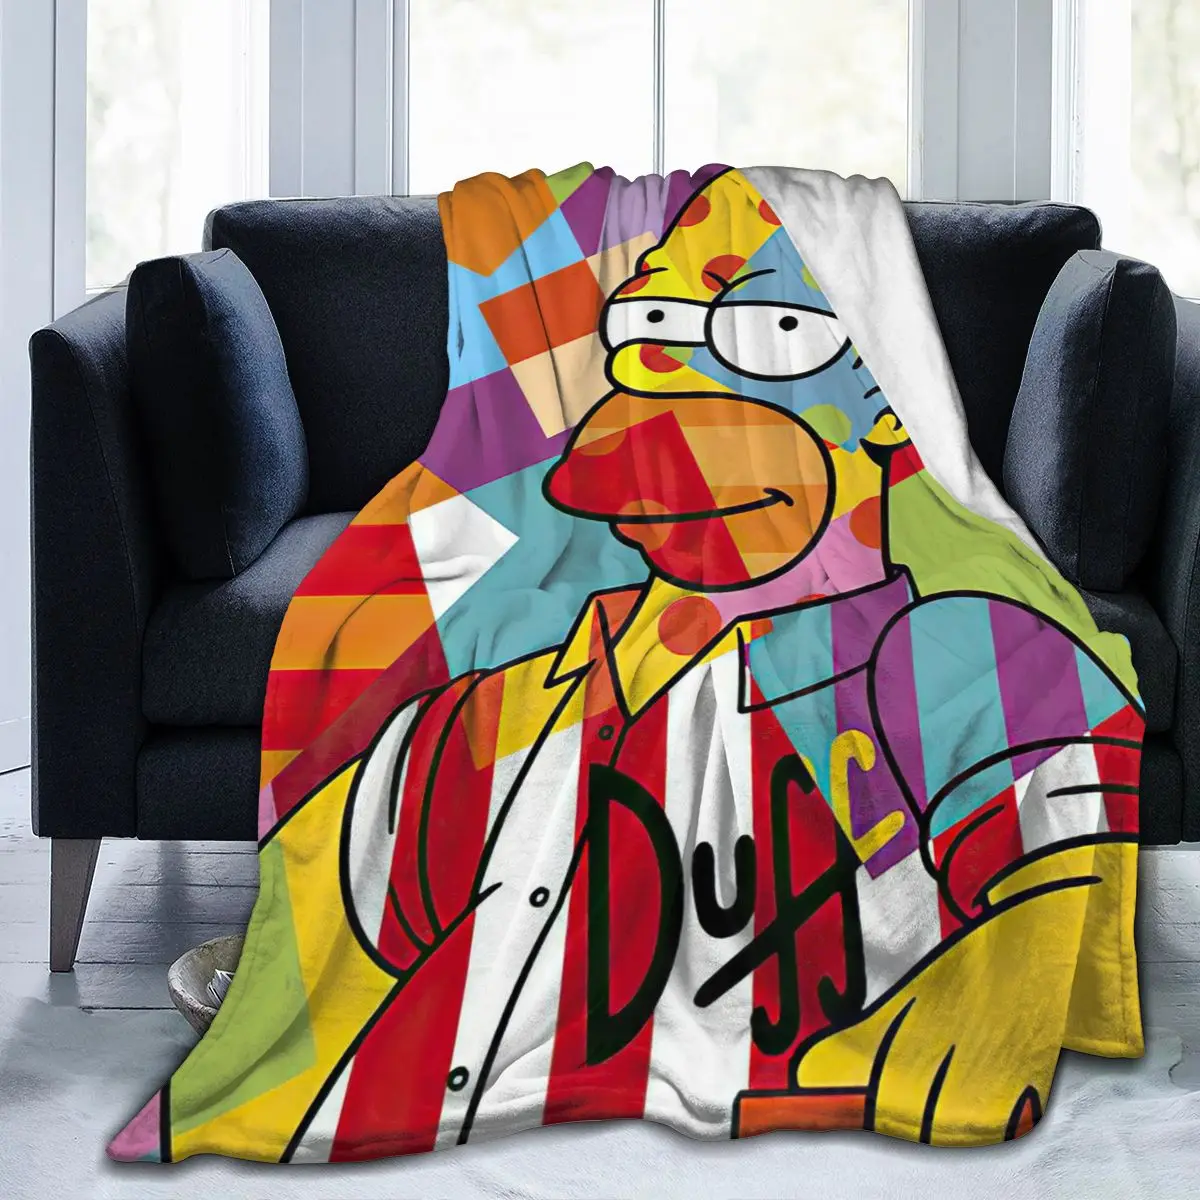 

Ultra Soft Sofa Blanket Cover Blanket Cartoon Cartoon Bedding Flannel plied Sofa Bedroom Decor for Children and Adults 278698741